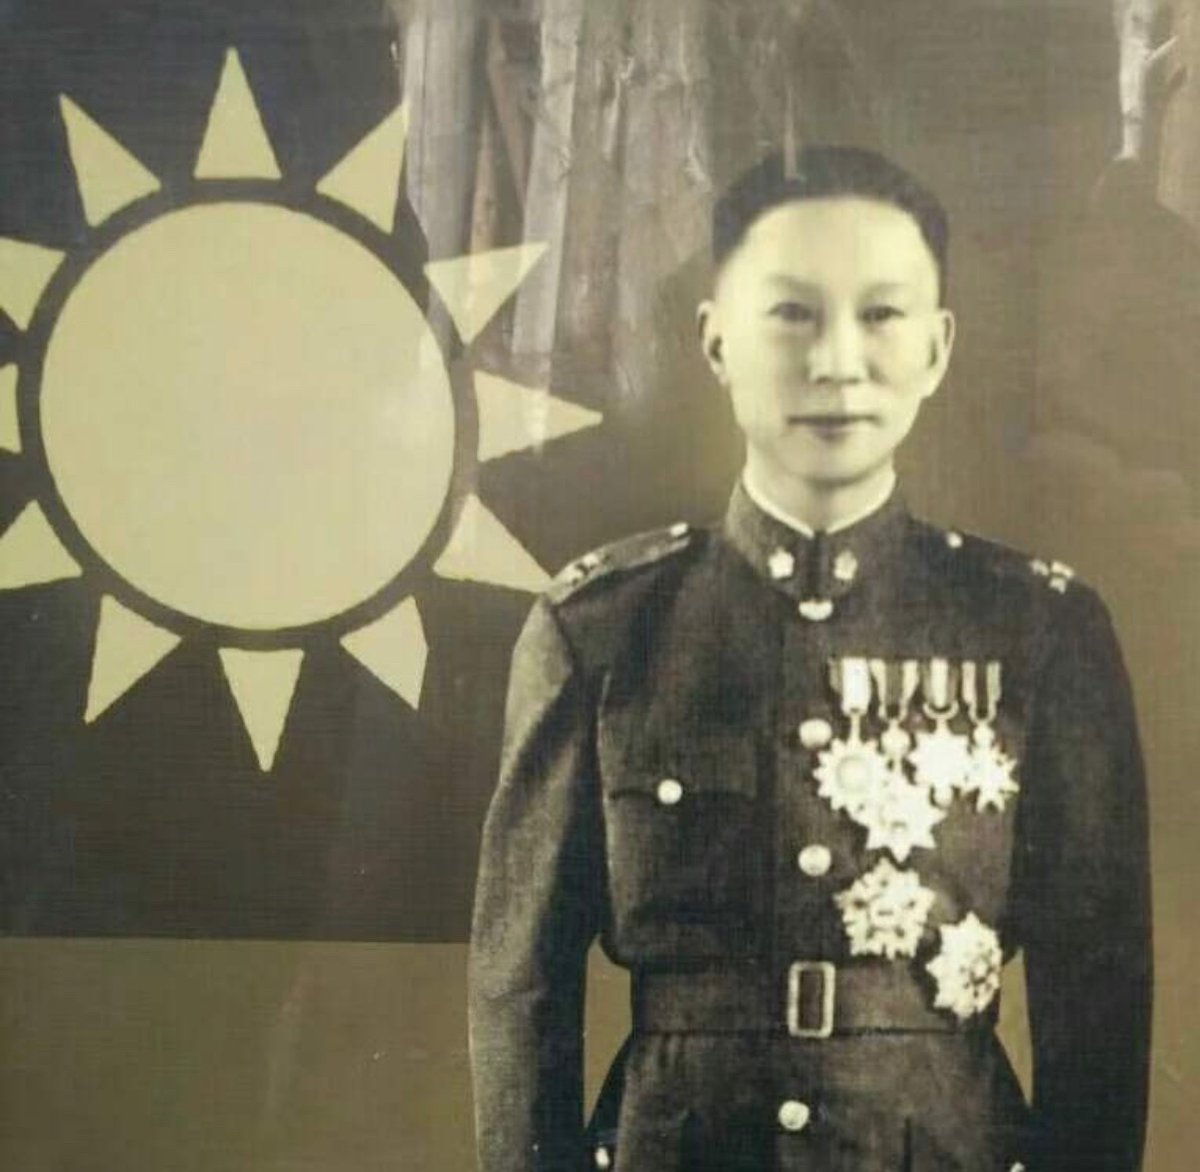 49) General Xue Yue, legendary battle captain of 2nd Sino-Japanese War, who finished Chinese Civil War as commander on Hainan Island. His vaunted combined-arms Air-Sea-Land defense there was foiled by communists landing in junks—Chinese wooden sailboats.  https://twitter.com/simonbchen/status/1310565482852831232?s=20